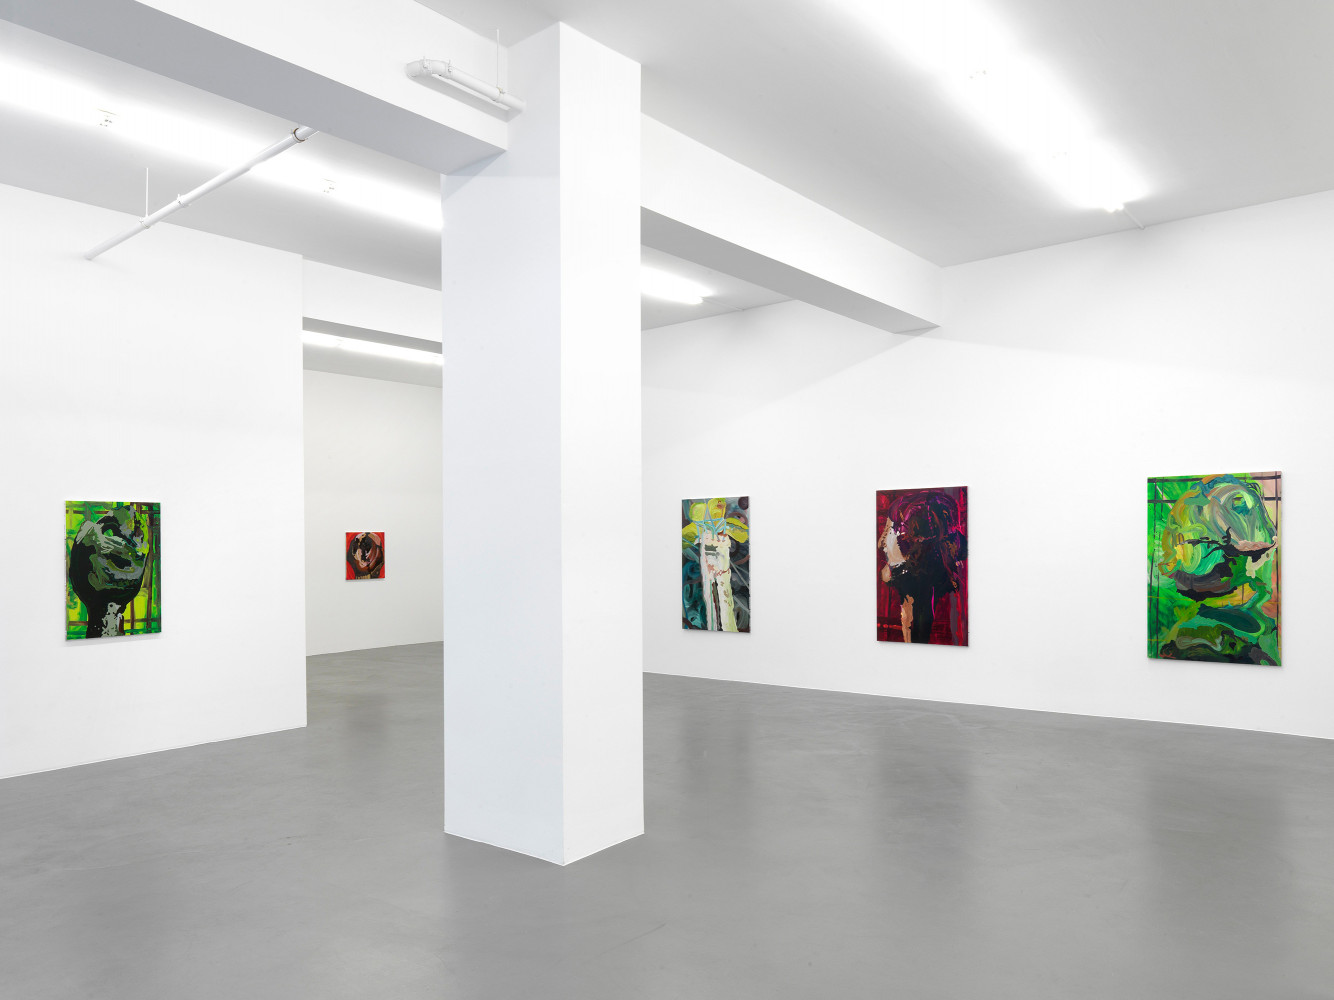 Clare Woods, Installation view, 2012